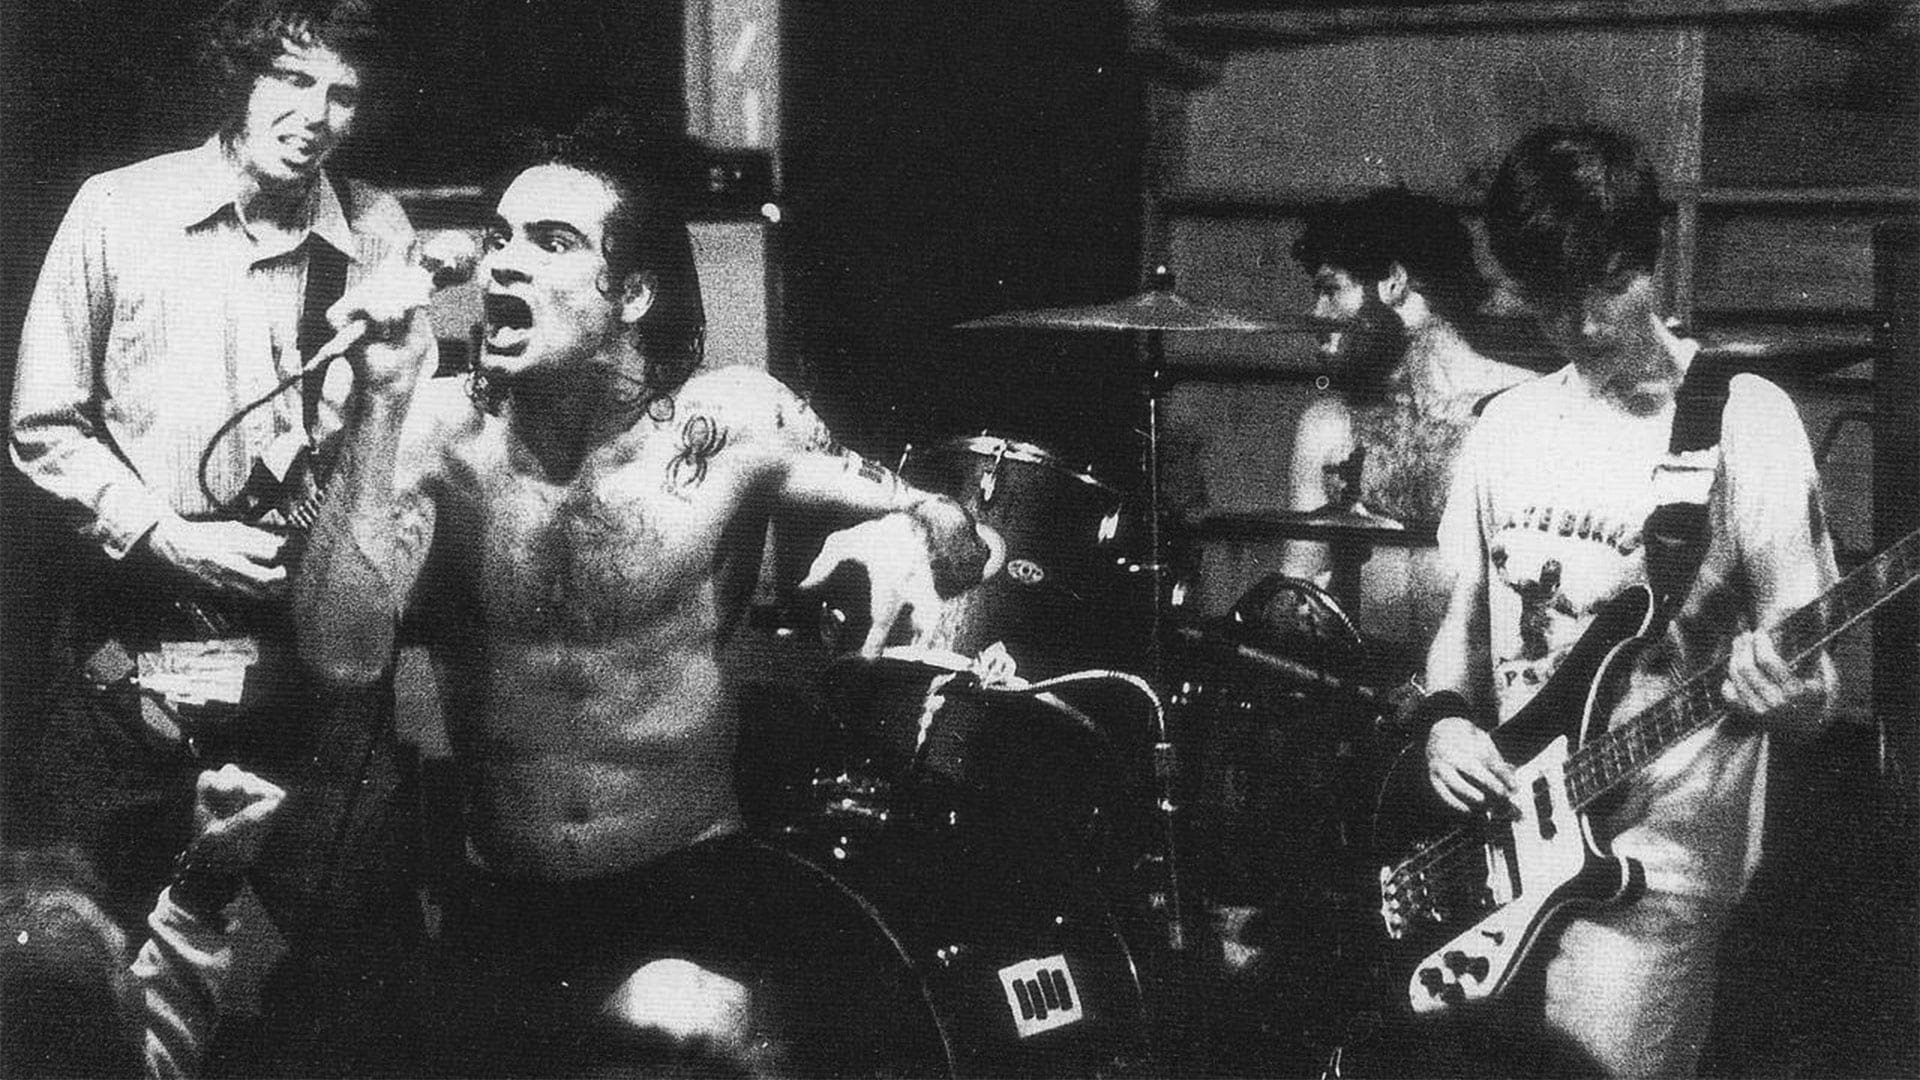 33 Years Ago: BLACK FLAG live at The Stone, San Francisco